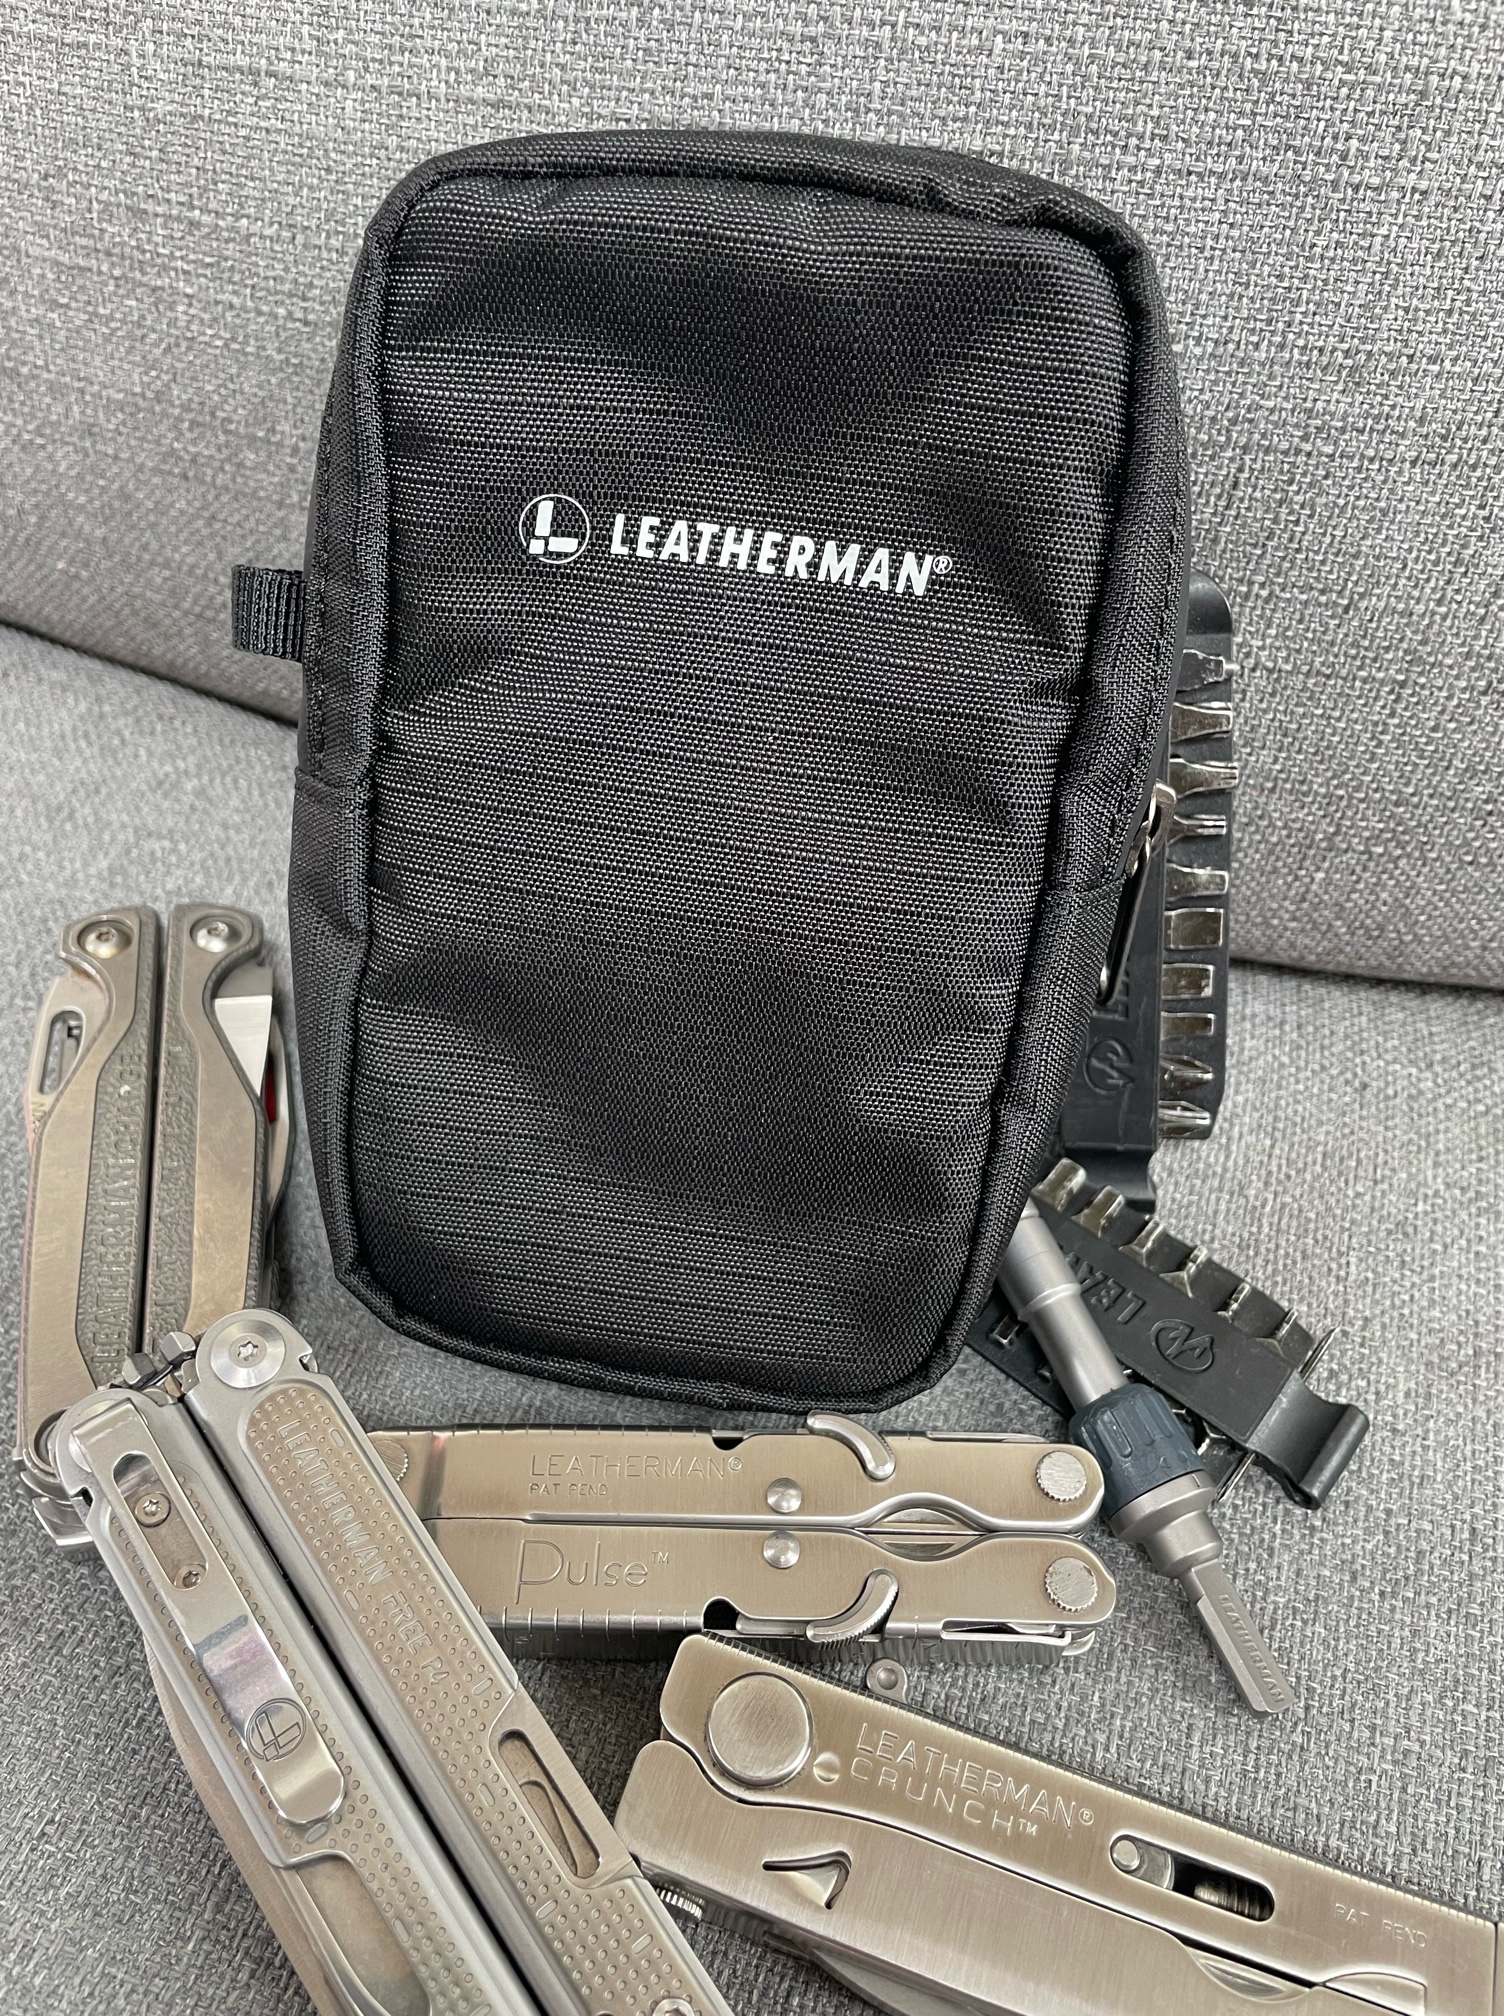 Leatherman Tool Pouch review - A new home for my multi-tools - The Gadgeteer